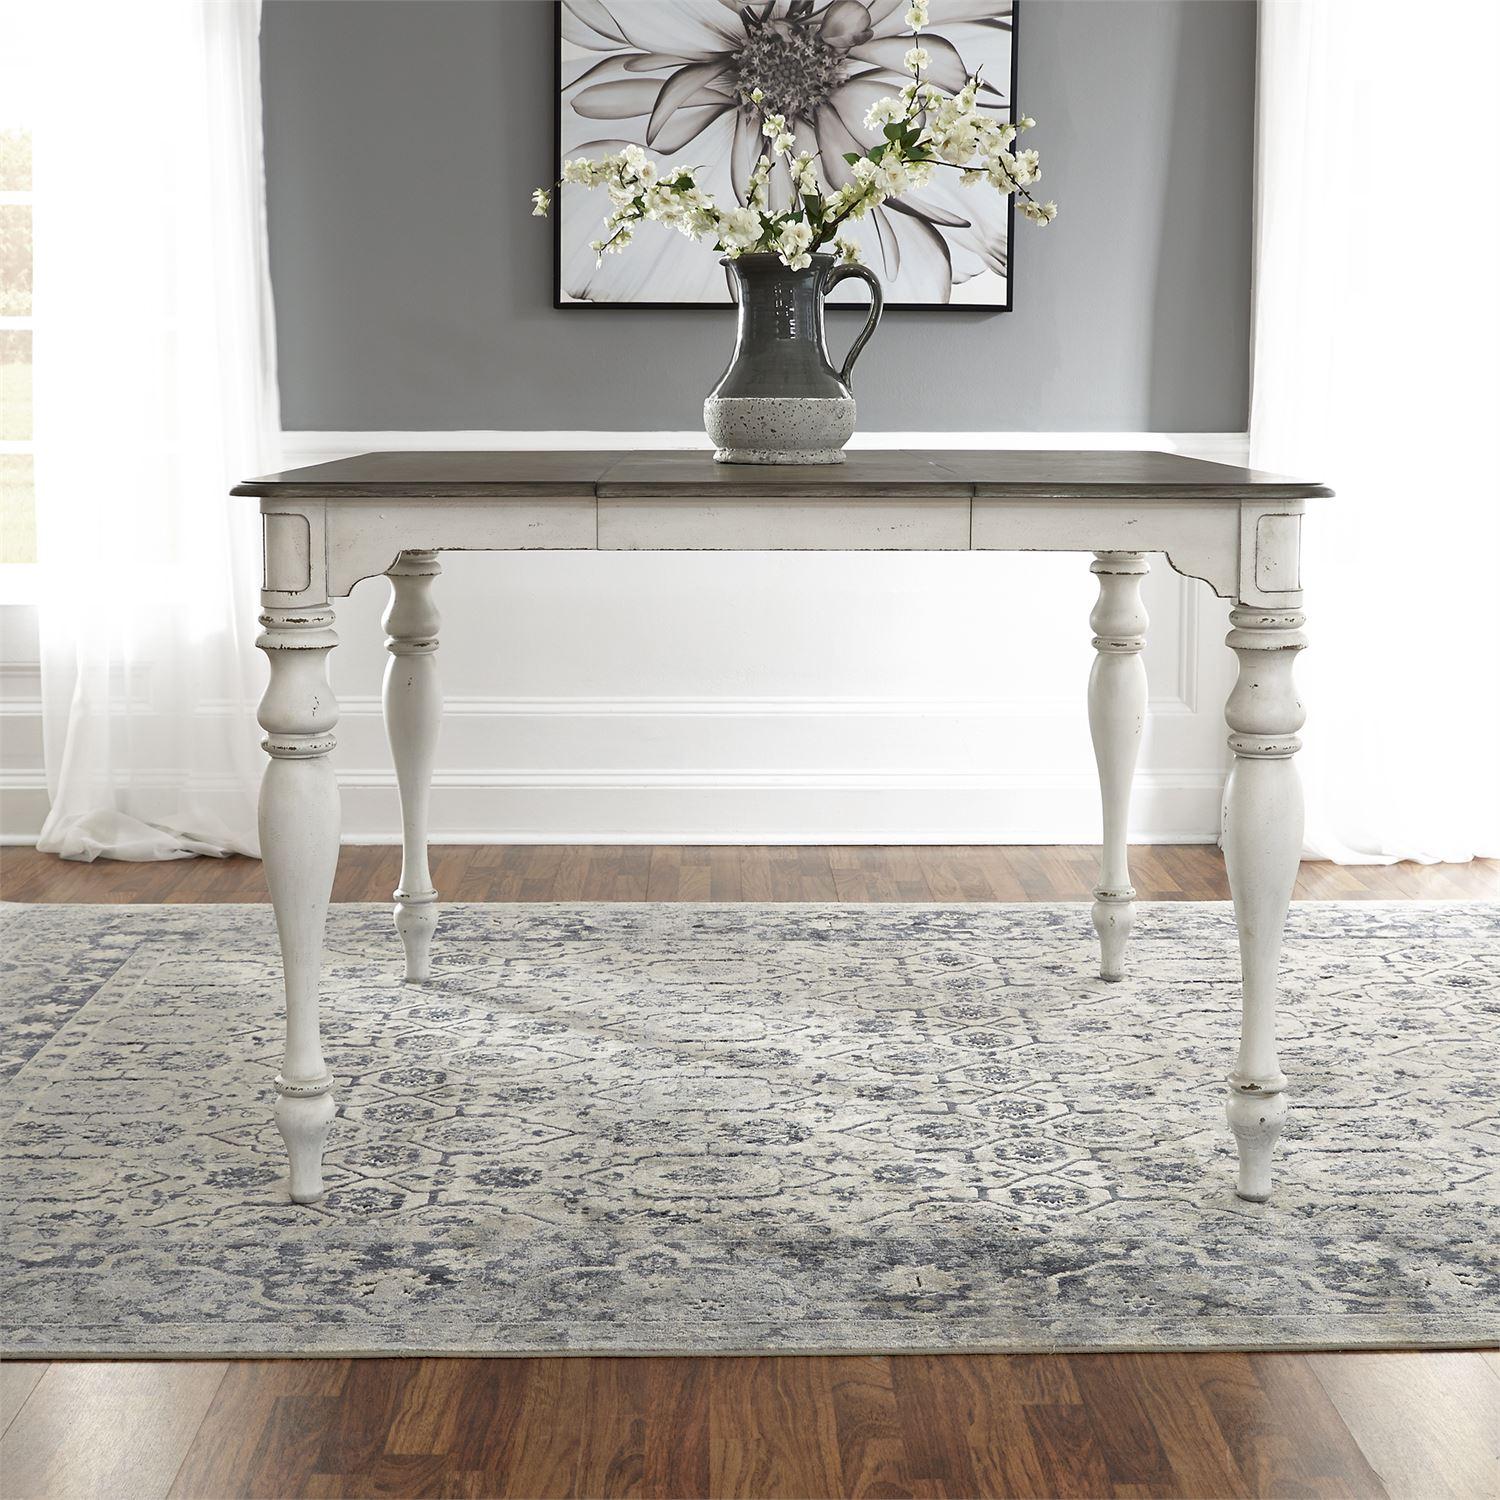 European Traditional Gathering Table Magnolia Manor  (244-CD) Gathering Table 244-GT5454 in White 